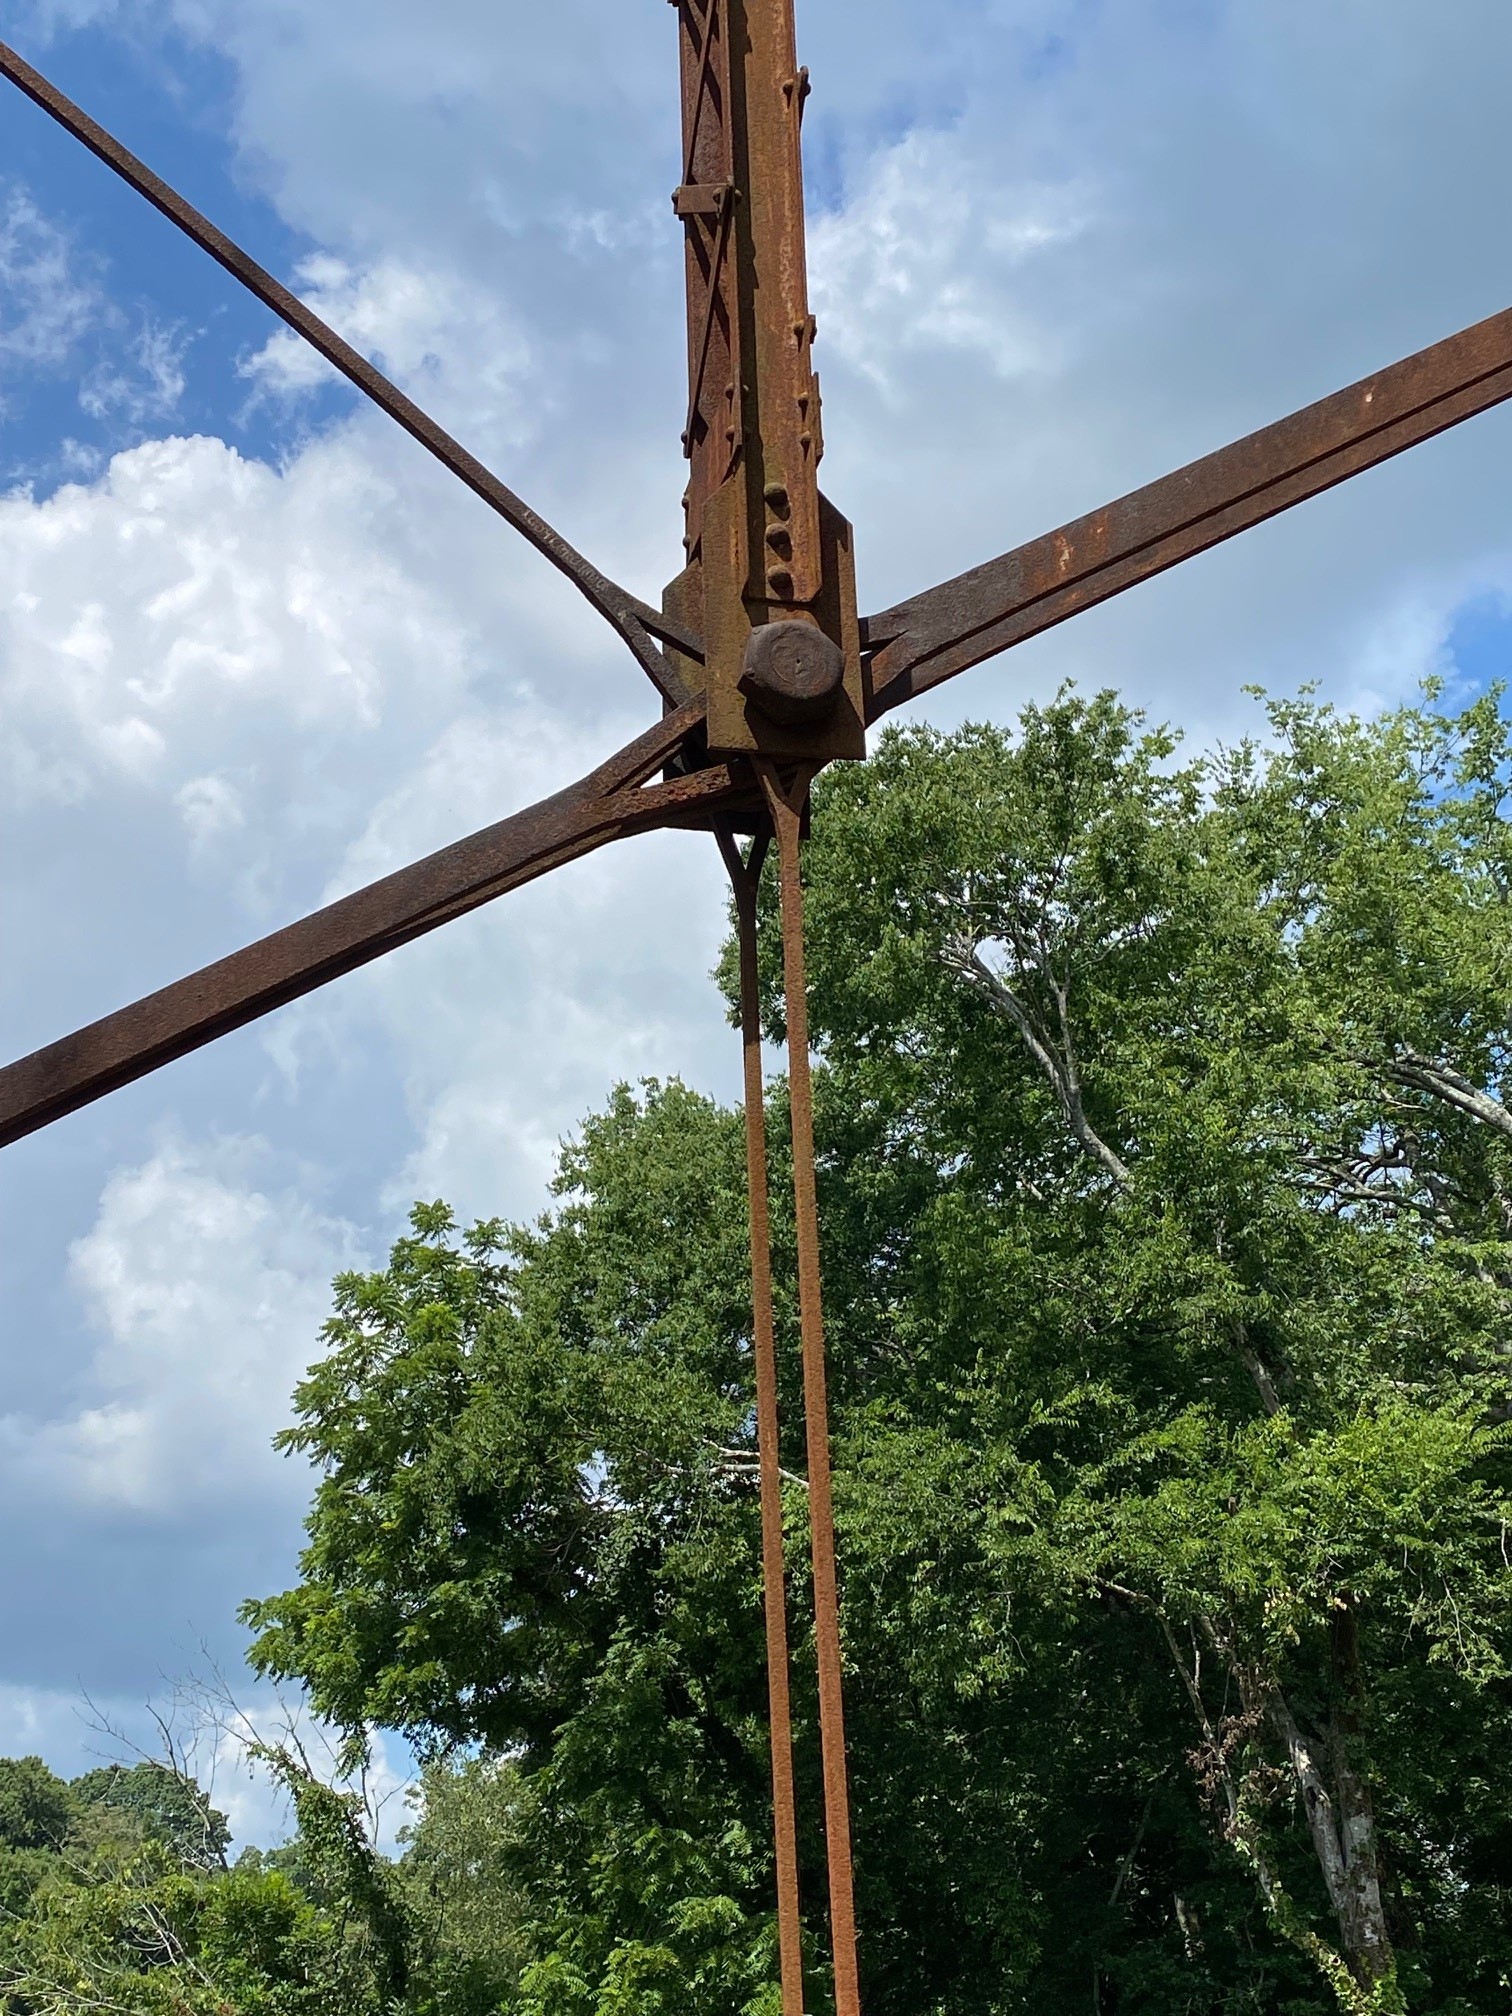 July 15 - Rogers Br - the pin connection that makes the bridge historic